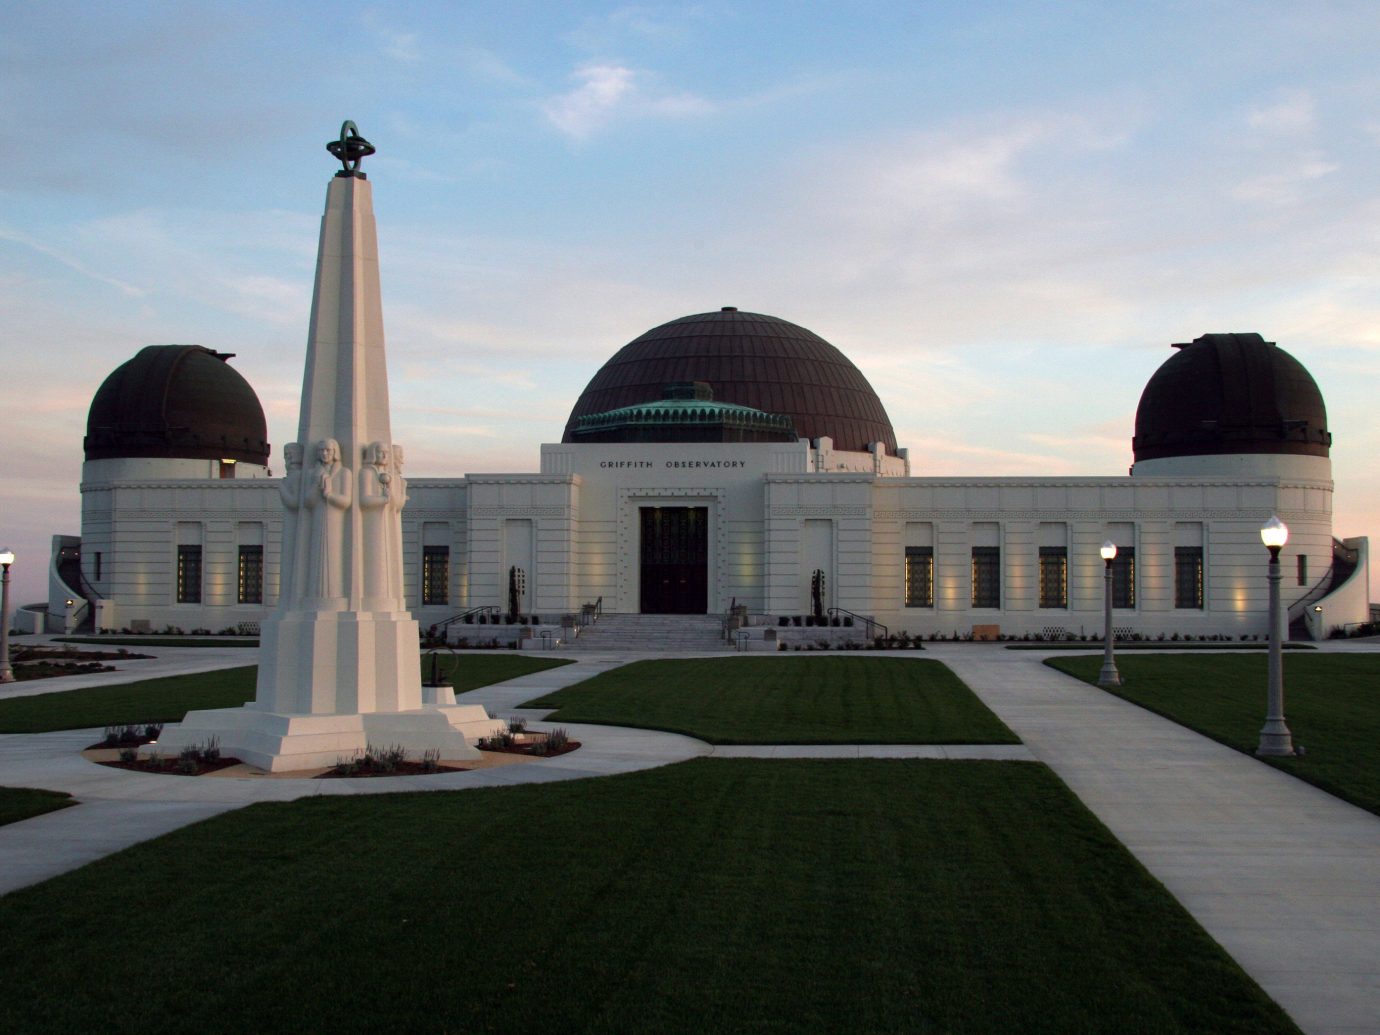 Budget sky outdoor grass building mosque landmark Architecture dome place of worship observatory memorial